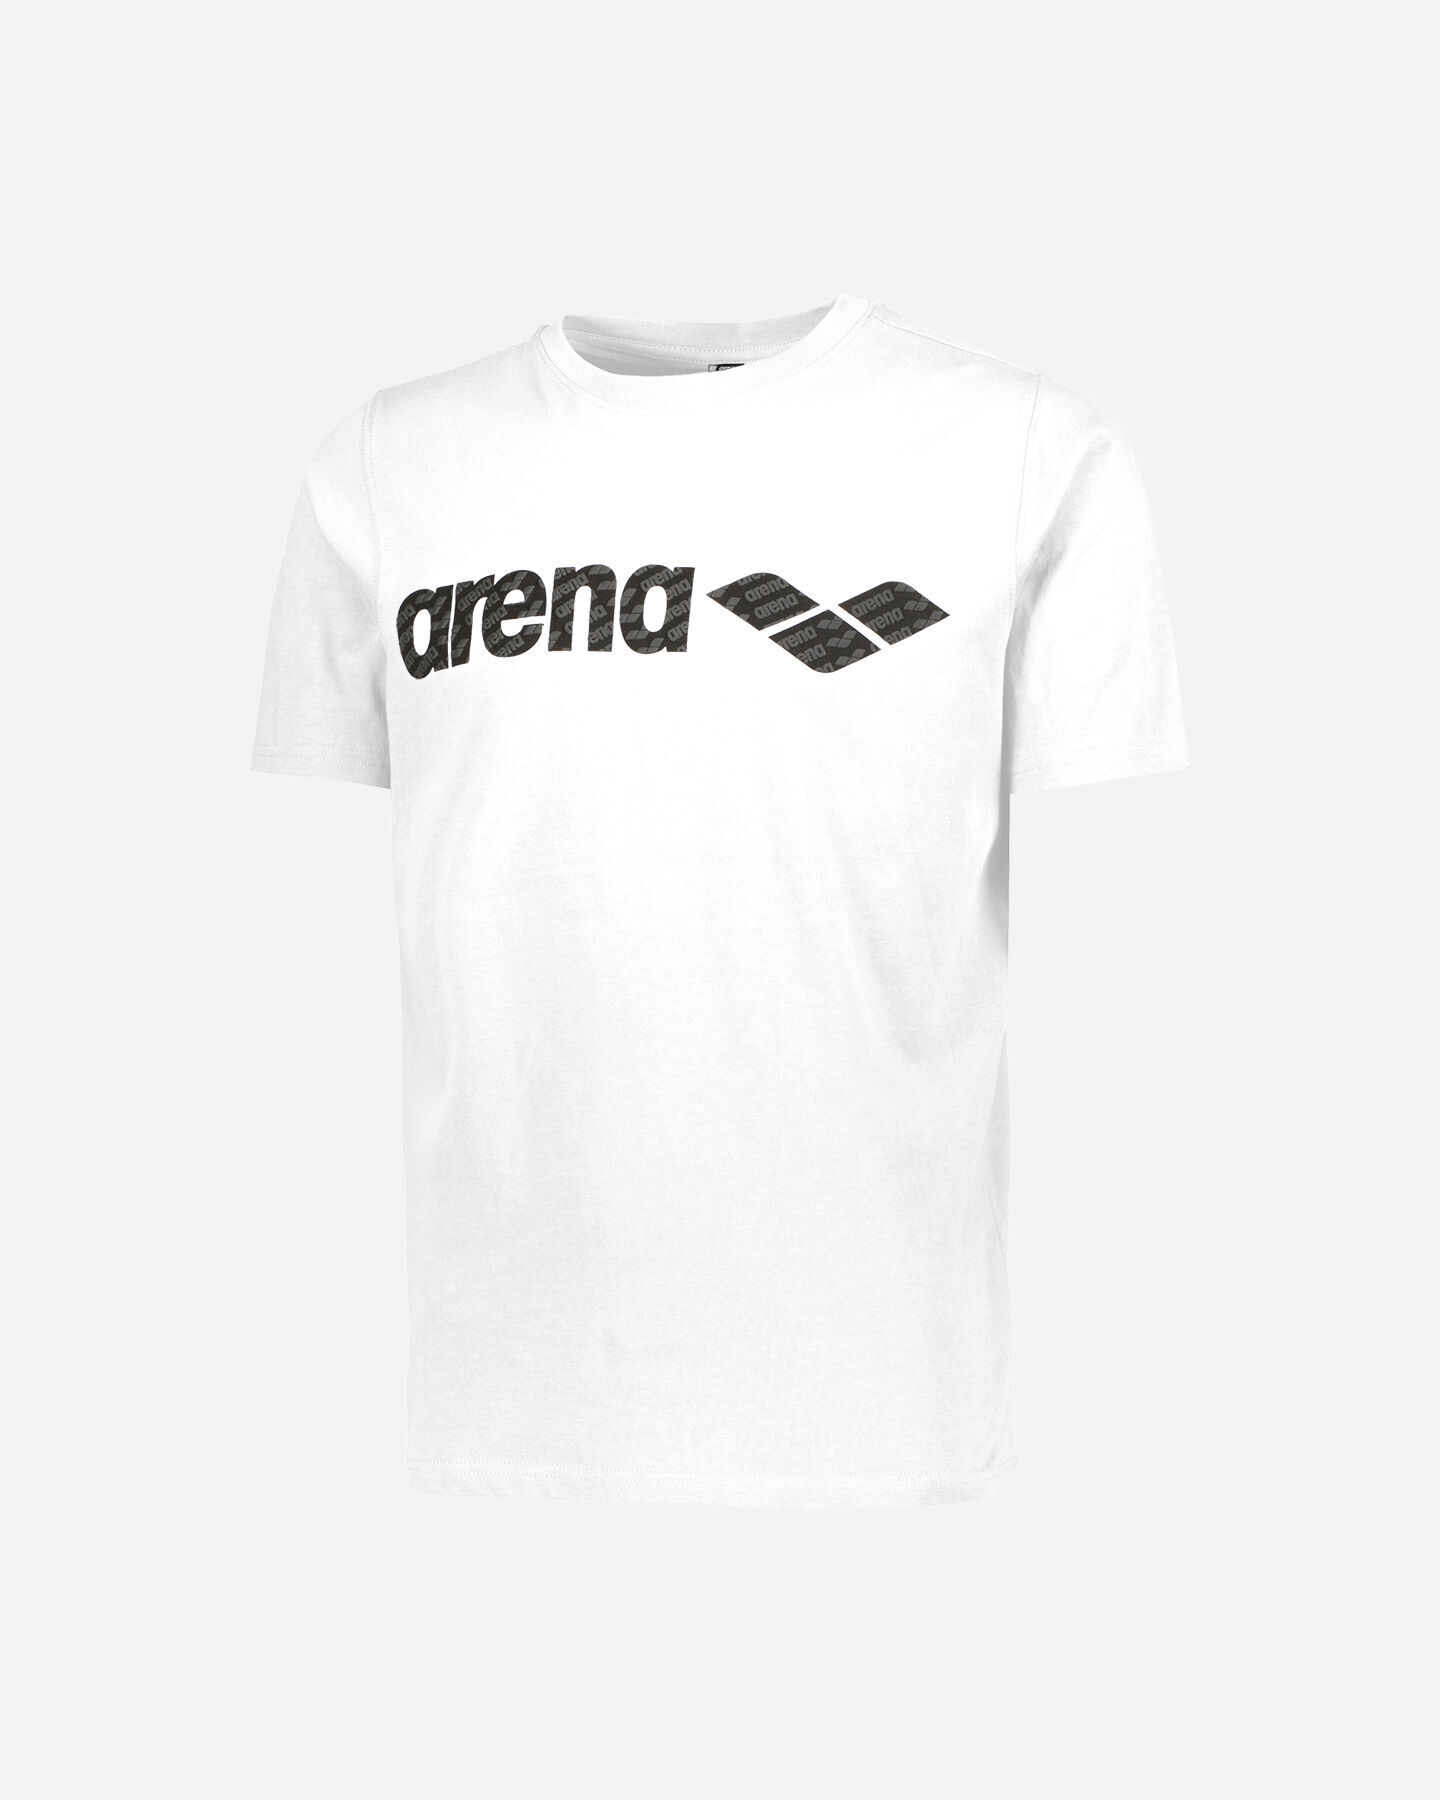  T-Shirt ARENA BIG LOGO LINEAR M S4093138|001|S scatto 5